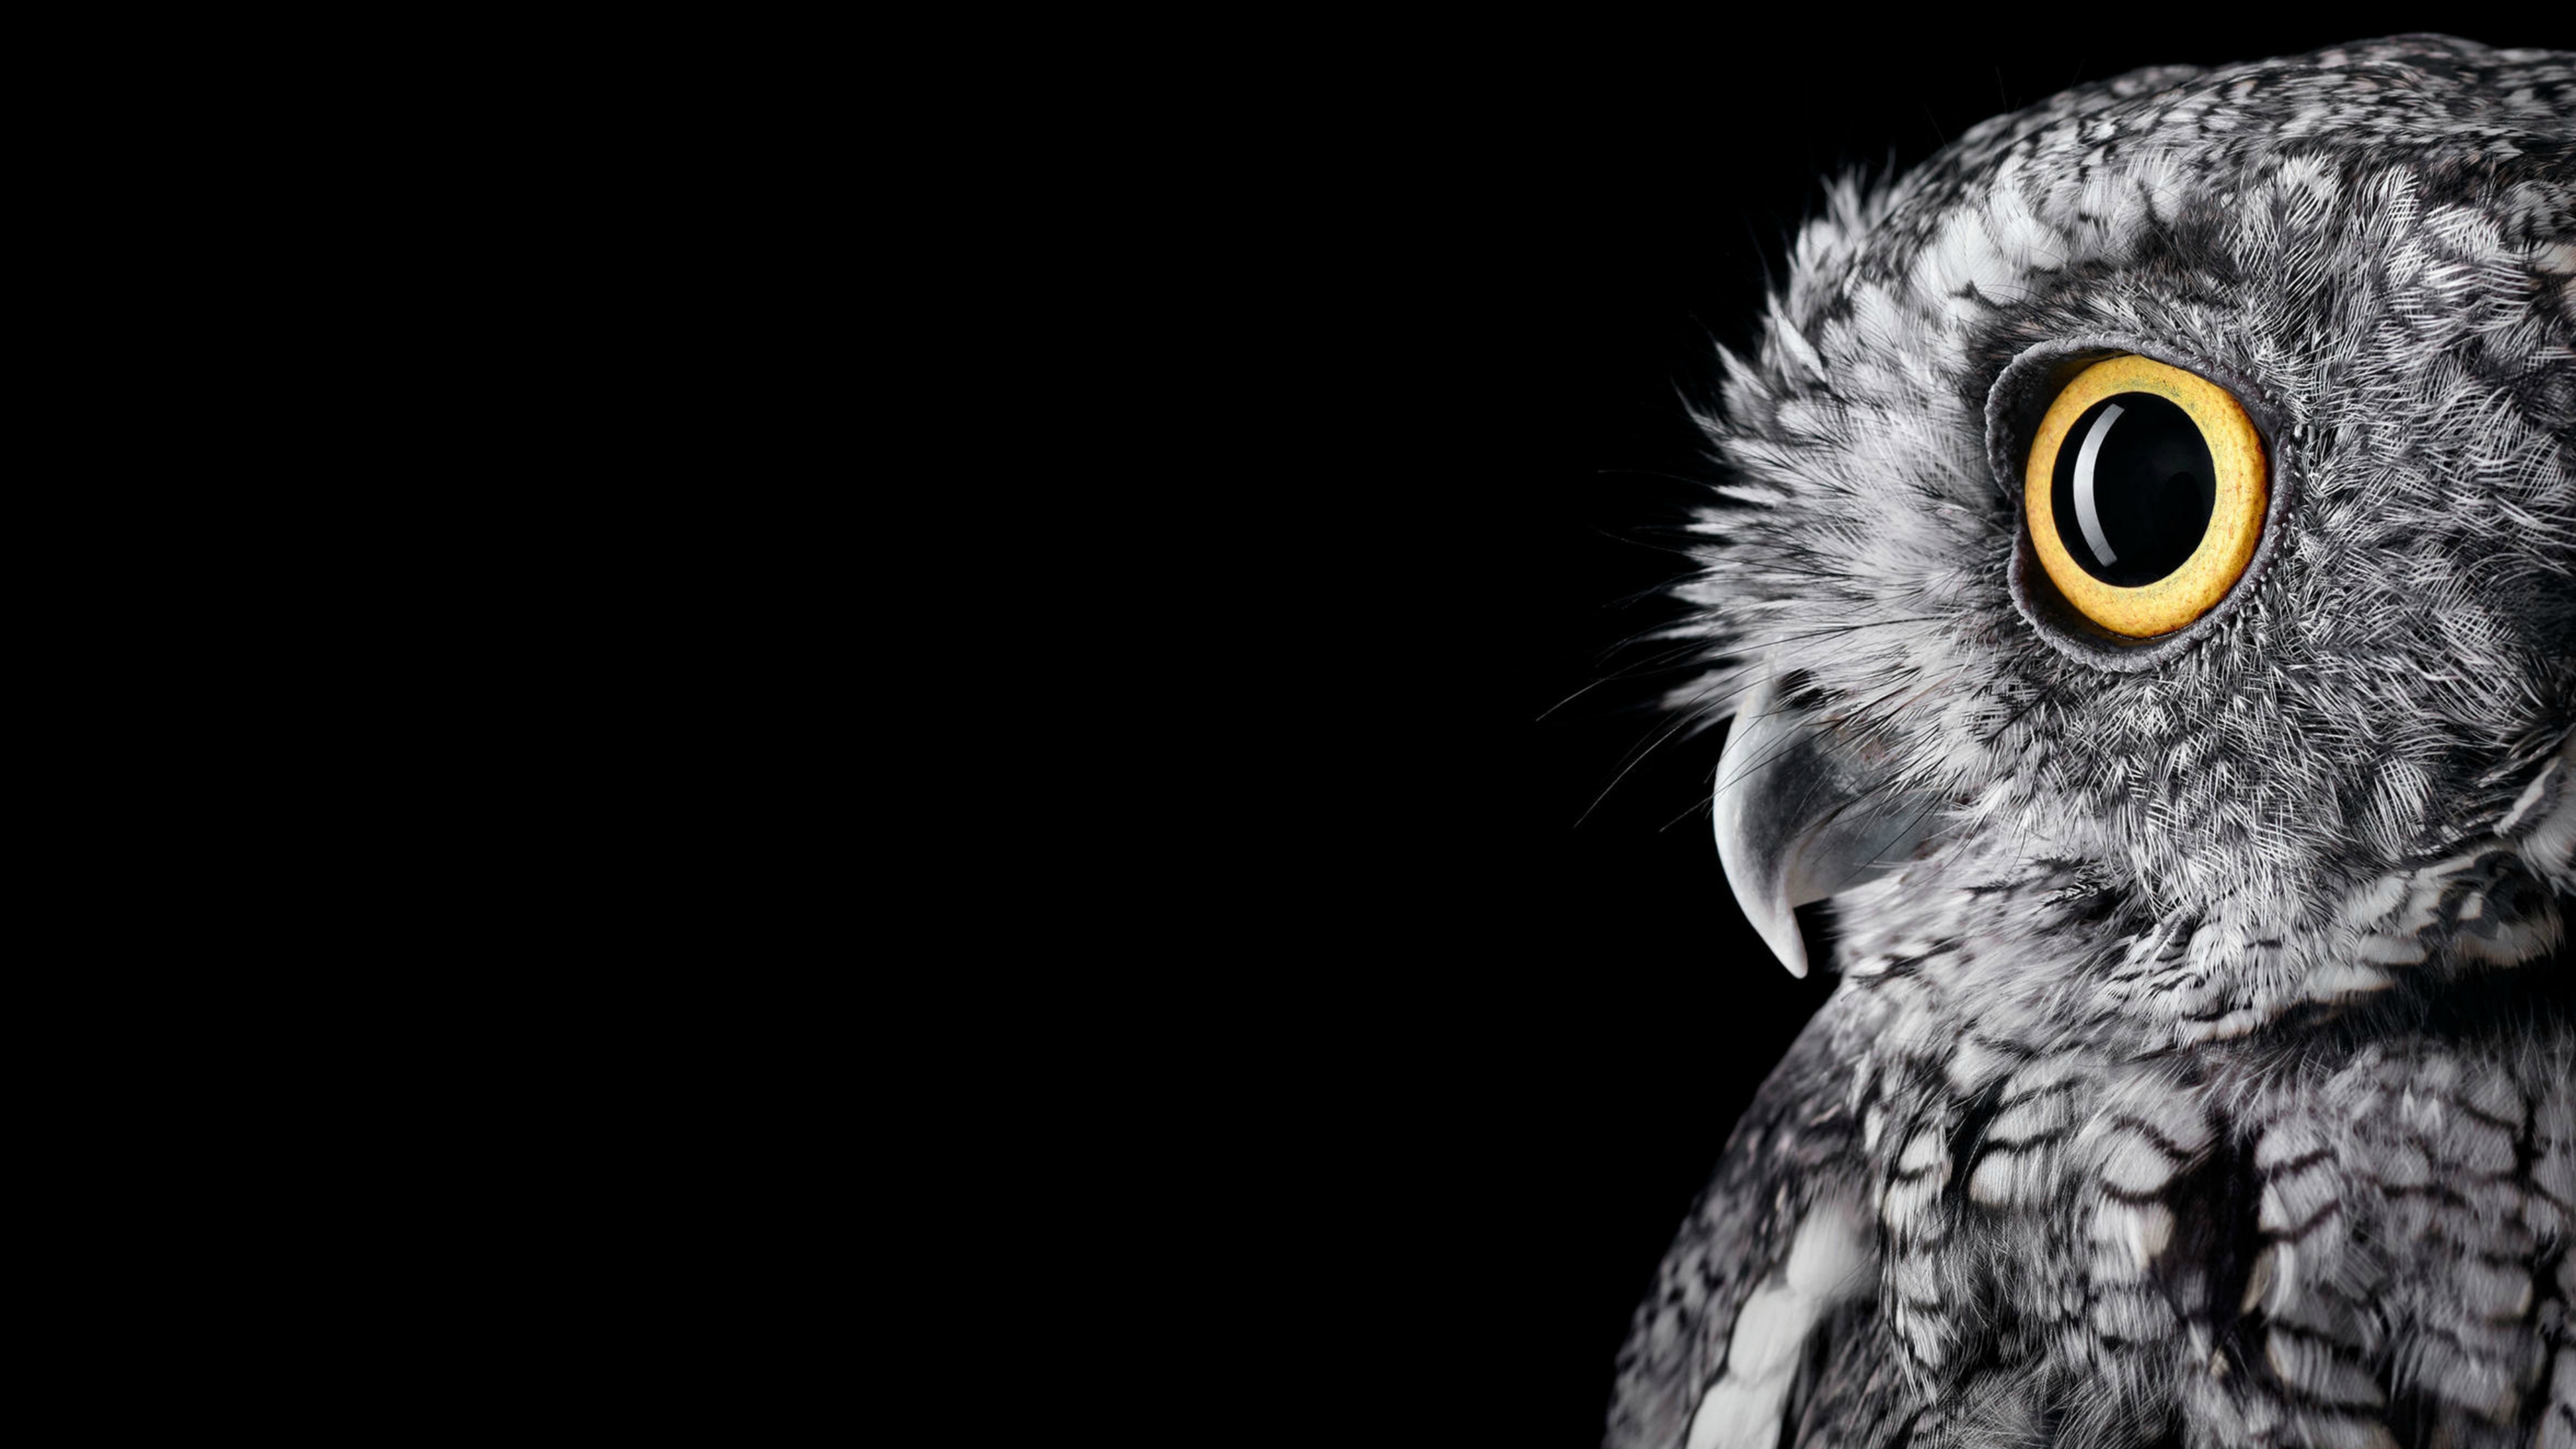 The owl in the monochrome photo is looking away on a black background